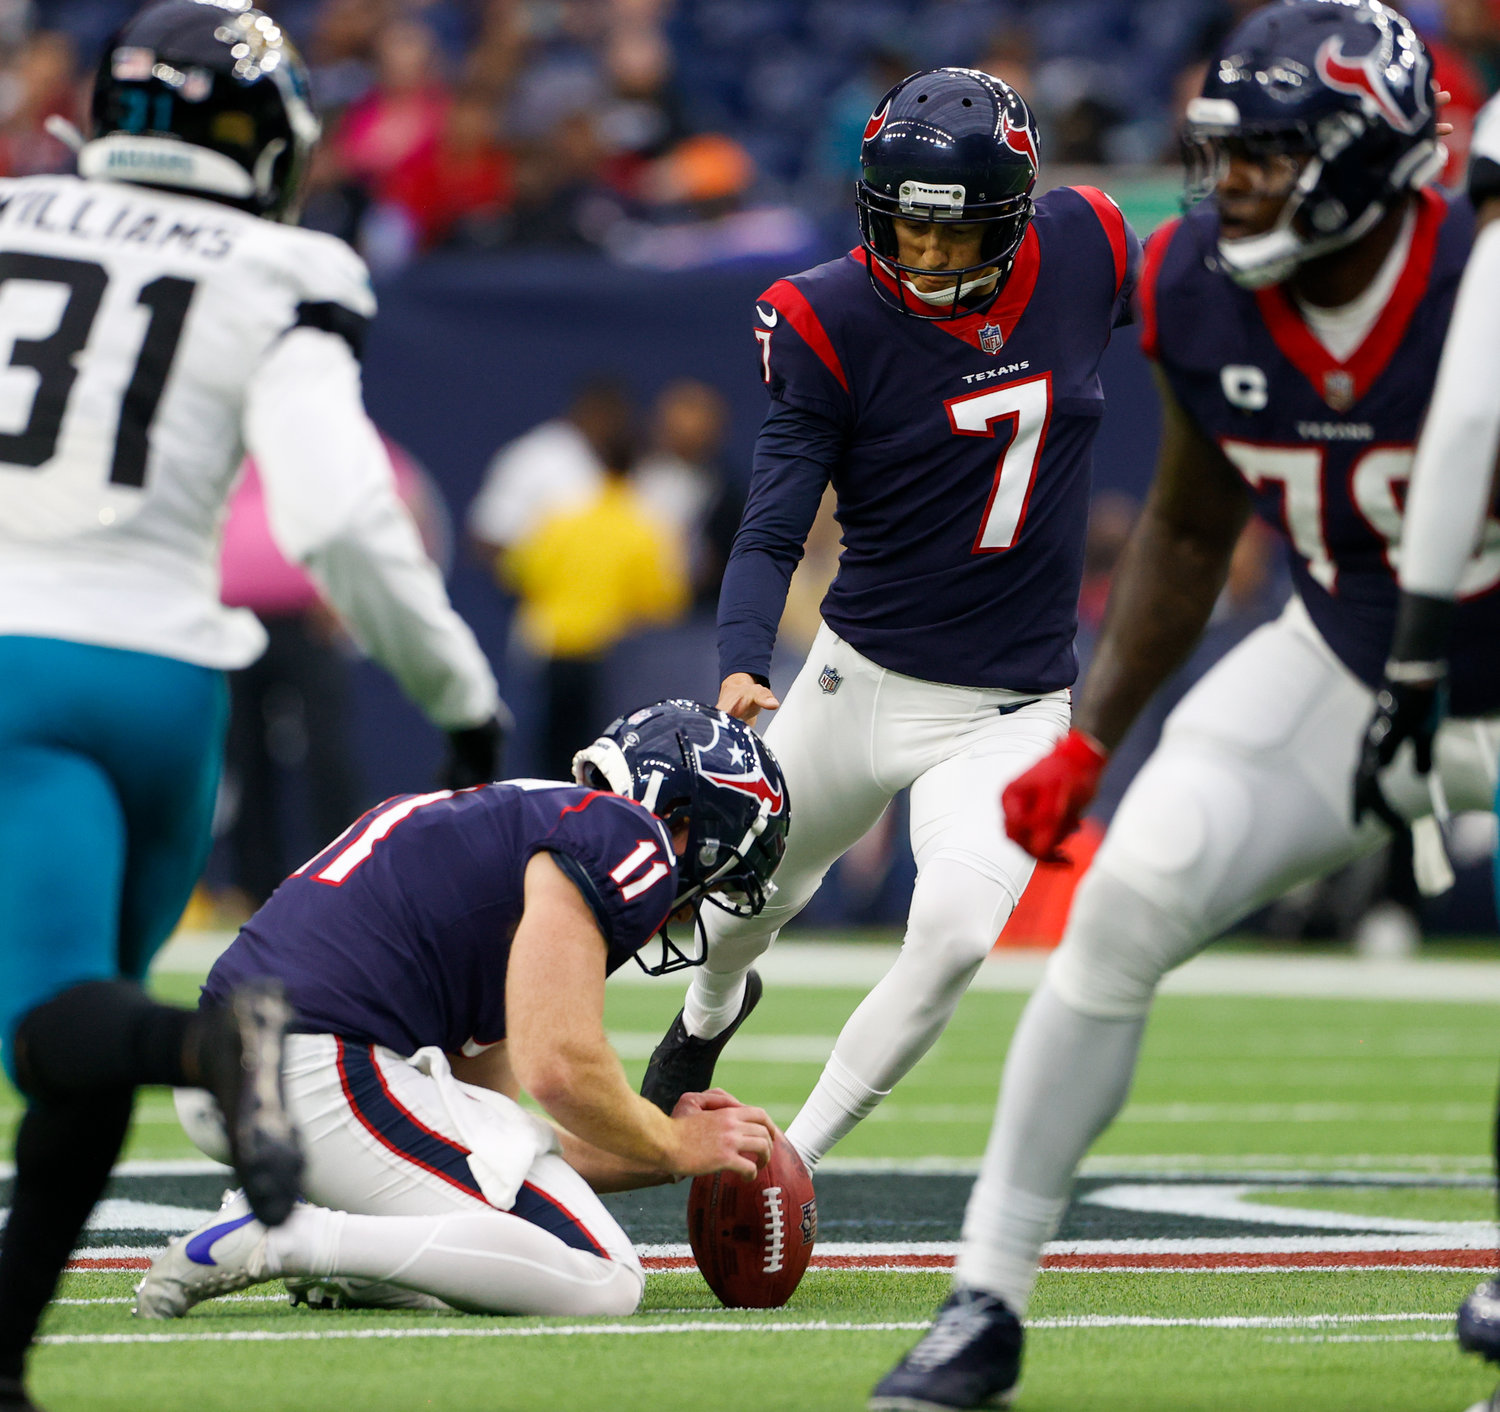 Texans place kicker Ka'imi Fairbairn (7) kicks a 56-yard field goal in the third quarter, for Houston’s only points of the game between the Texans and the Jaguars on Jan. 1, 2023 in Houston. The Jaguars won, 31-3.